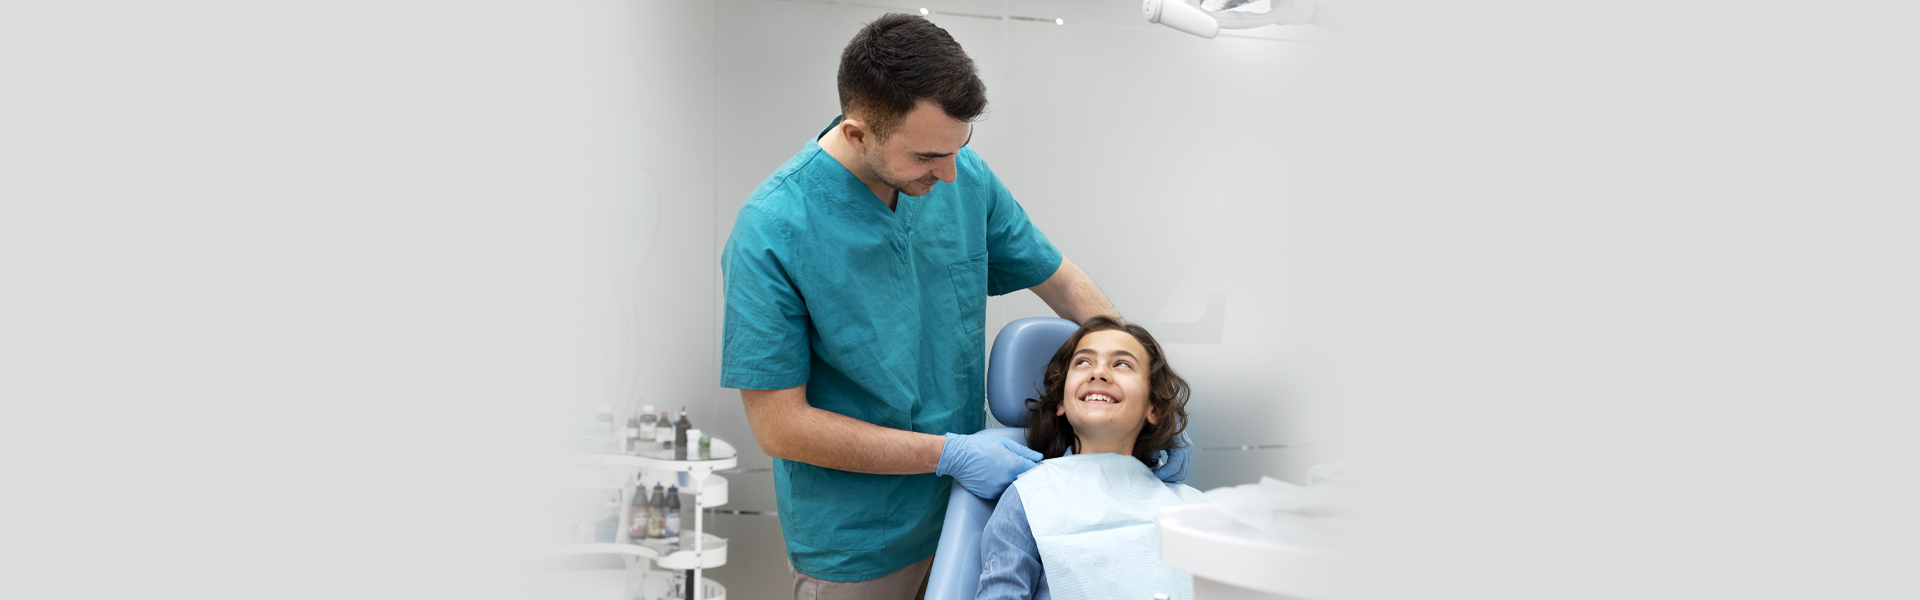 6 Crucial Thing Every Parent Should Know About Children’s Dentistry in Laguna Beach, CA